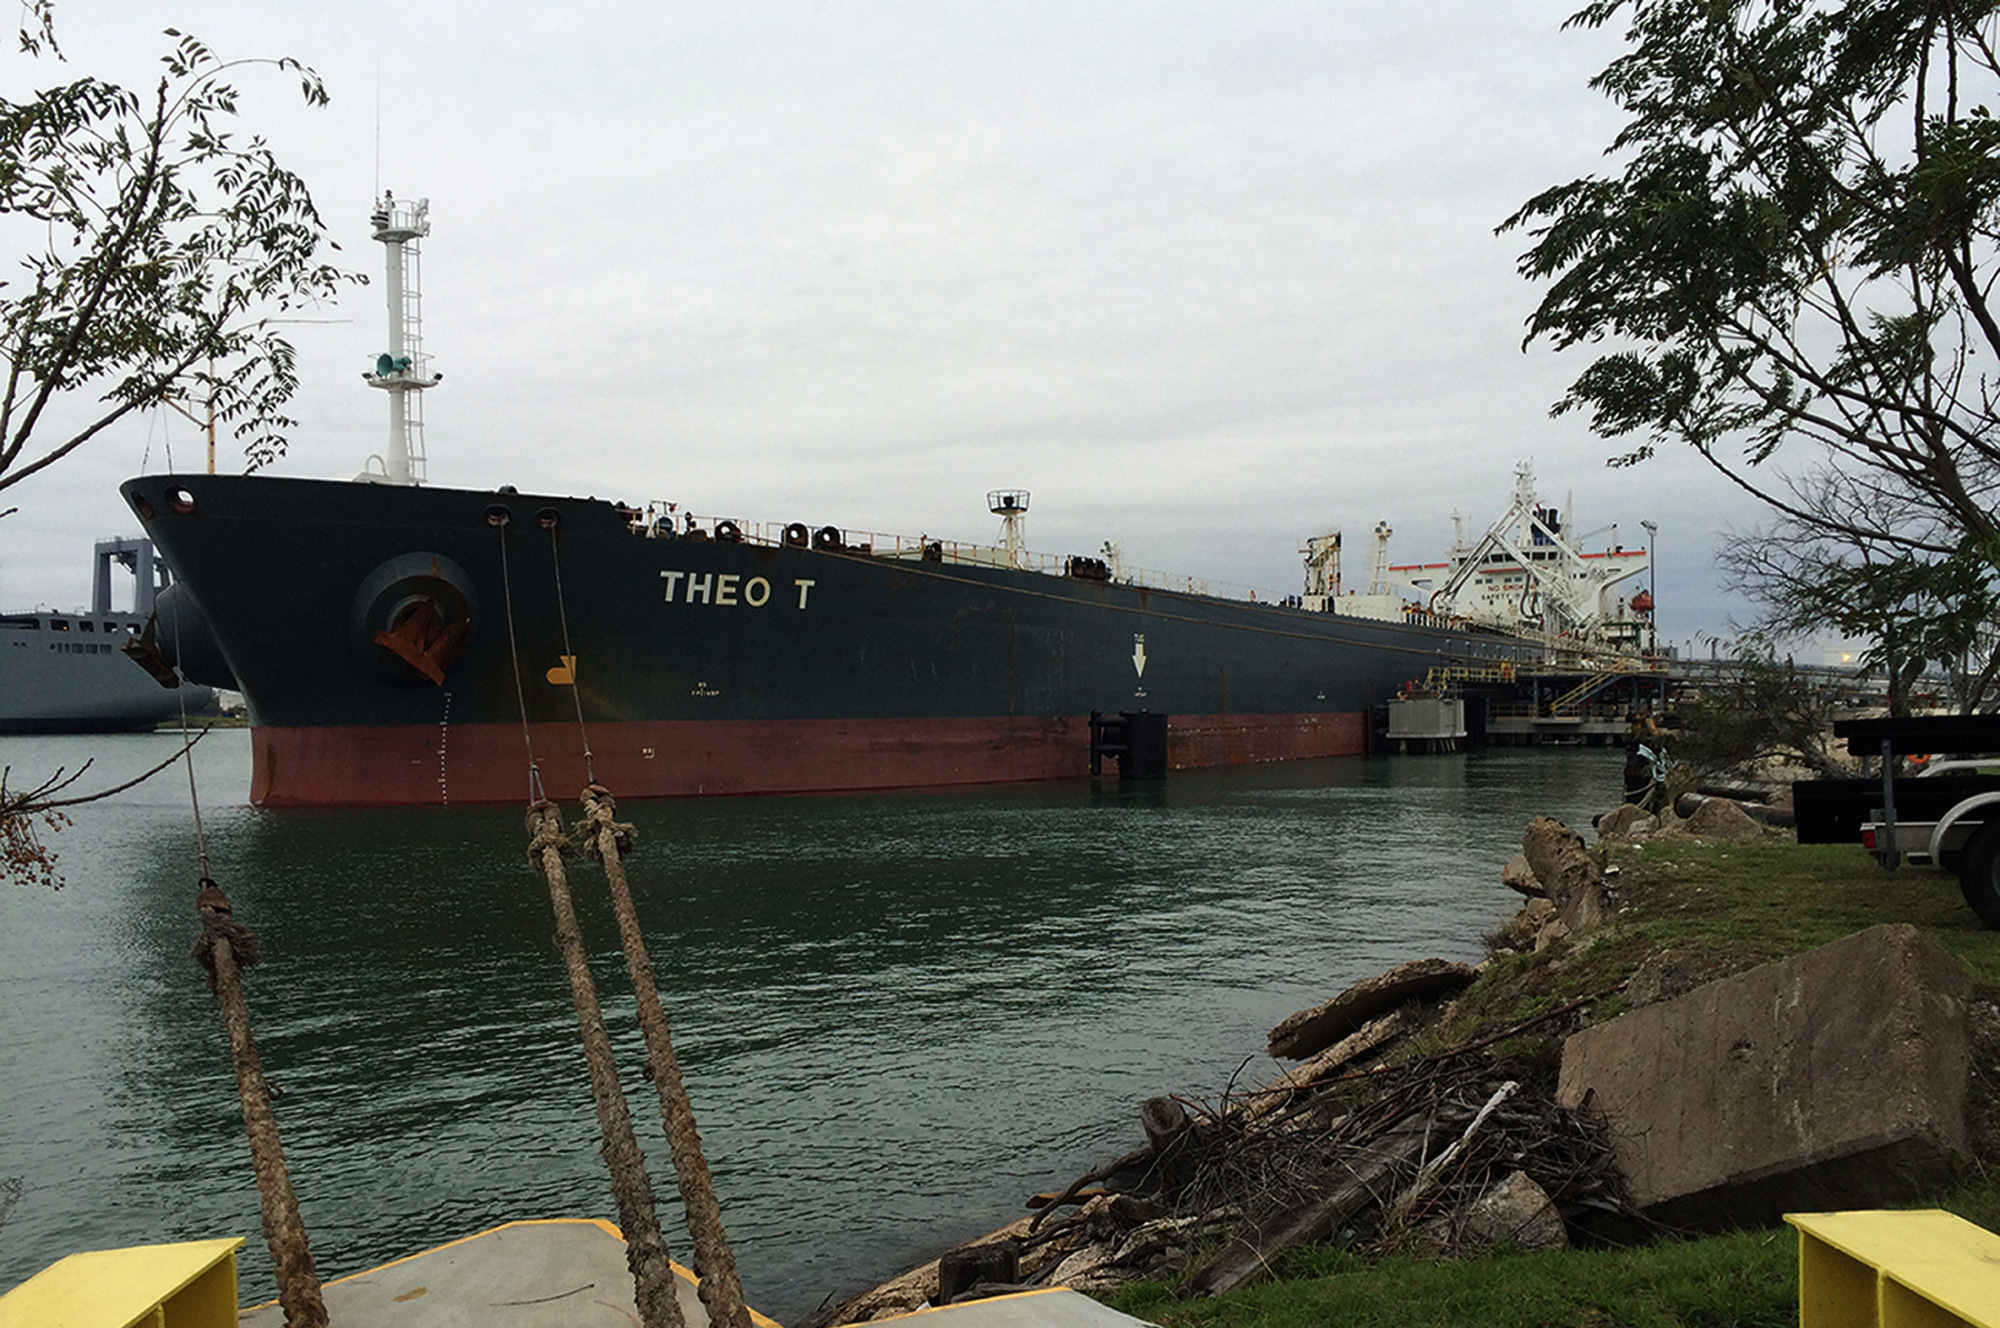 The Theo T oil tanker docked at a NuStar&nbsp;facility in Corpus Christi, Texas, on Dec. 31, 2015.